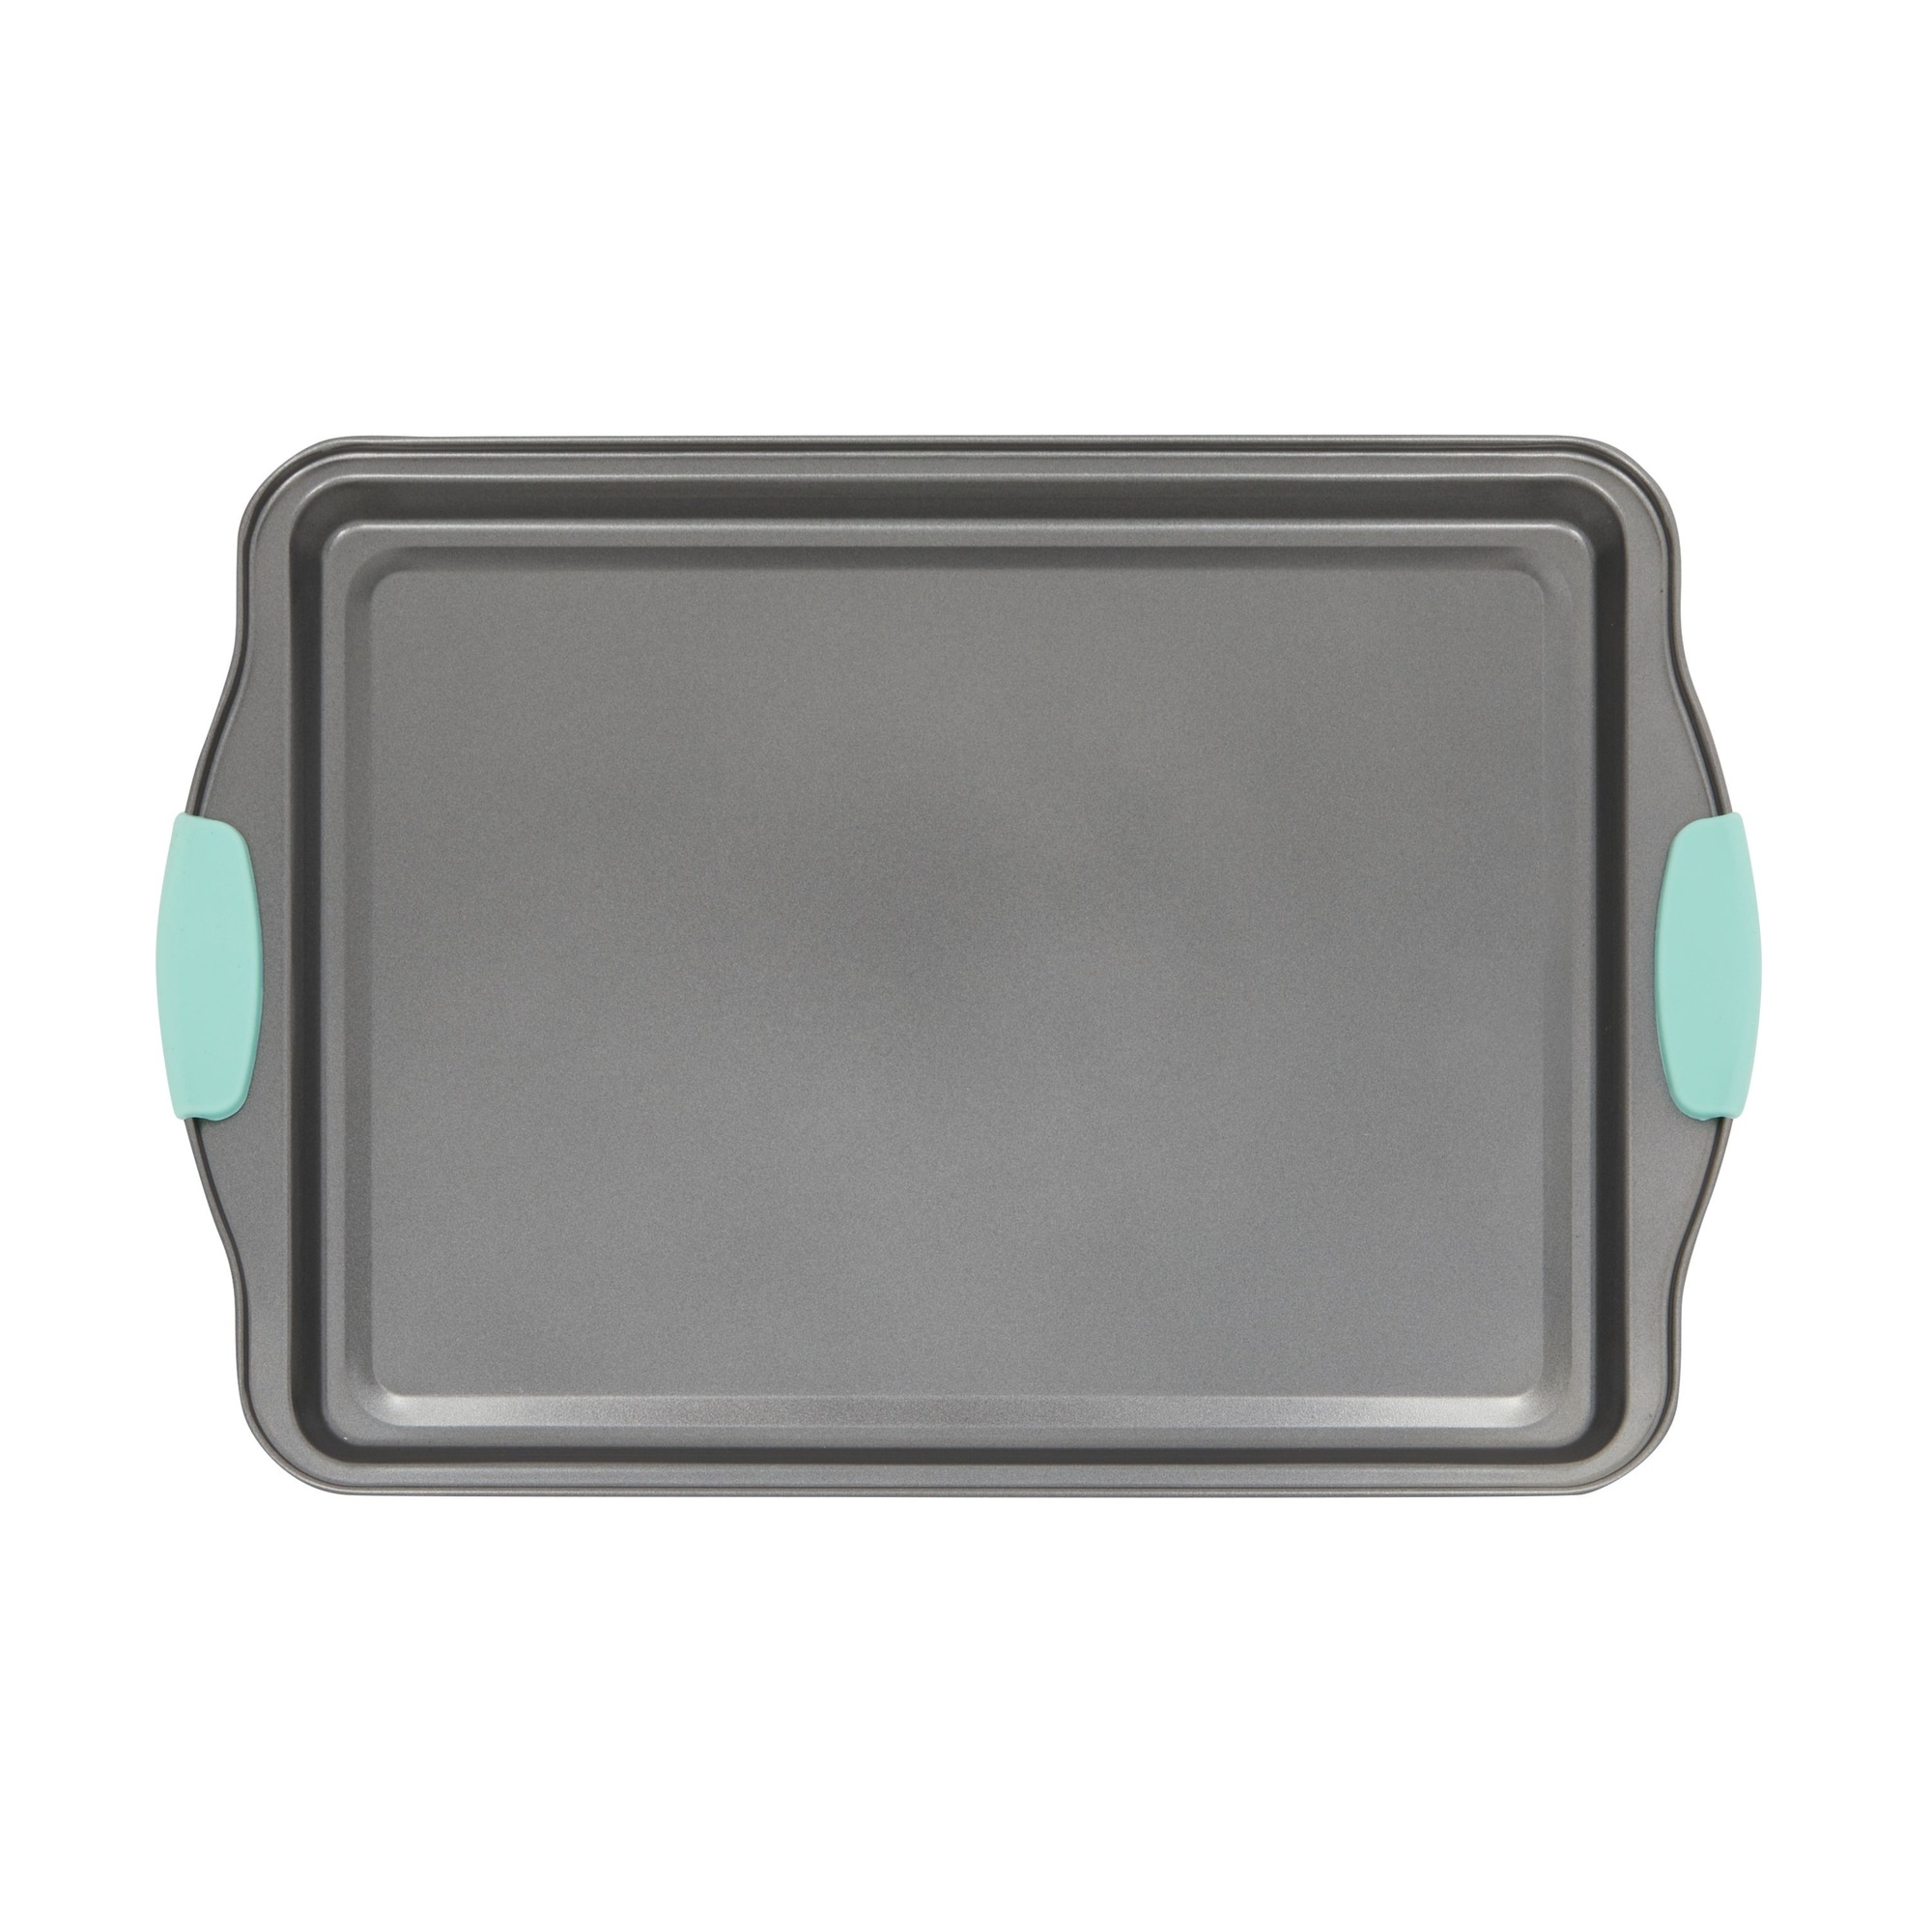 Calphalon Nonstick Bakeware, Cookie Sheet, 14-inch by 17-inch